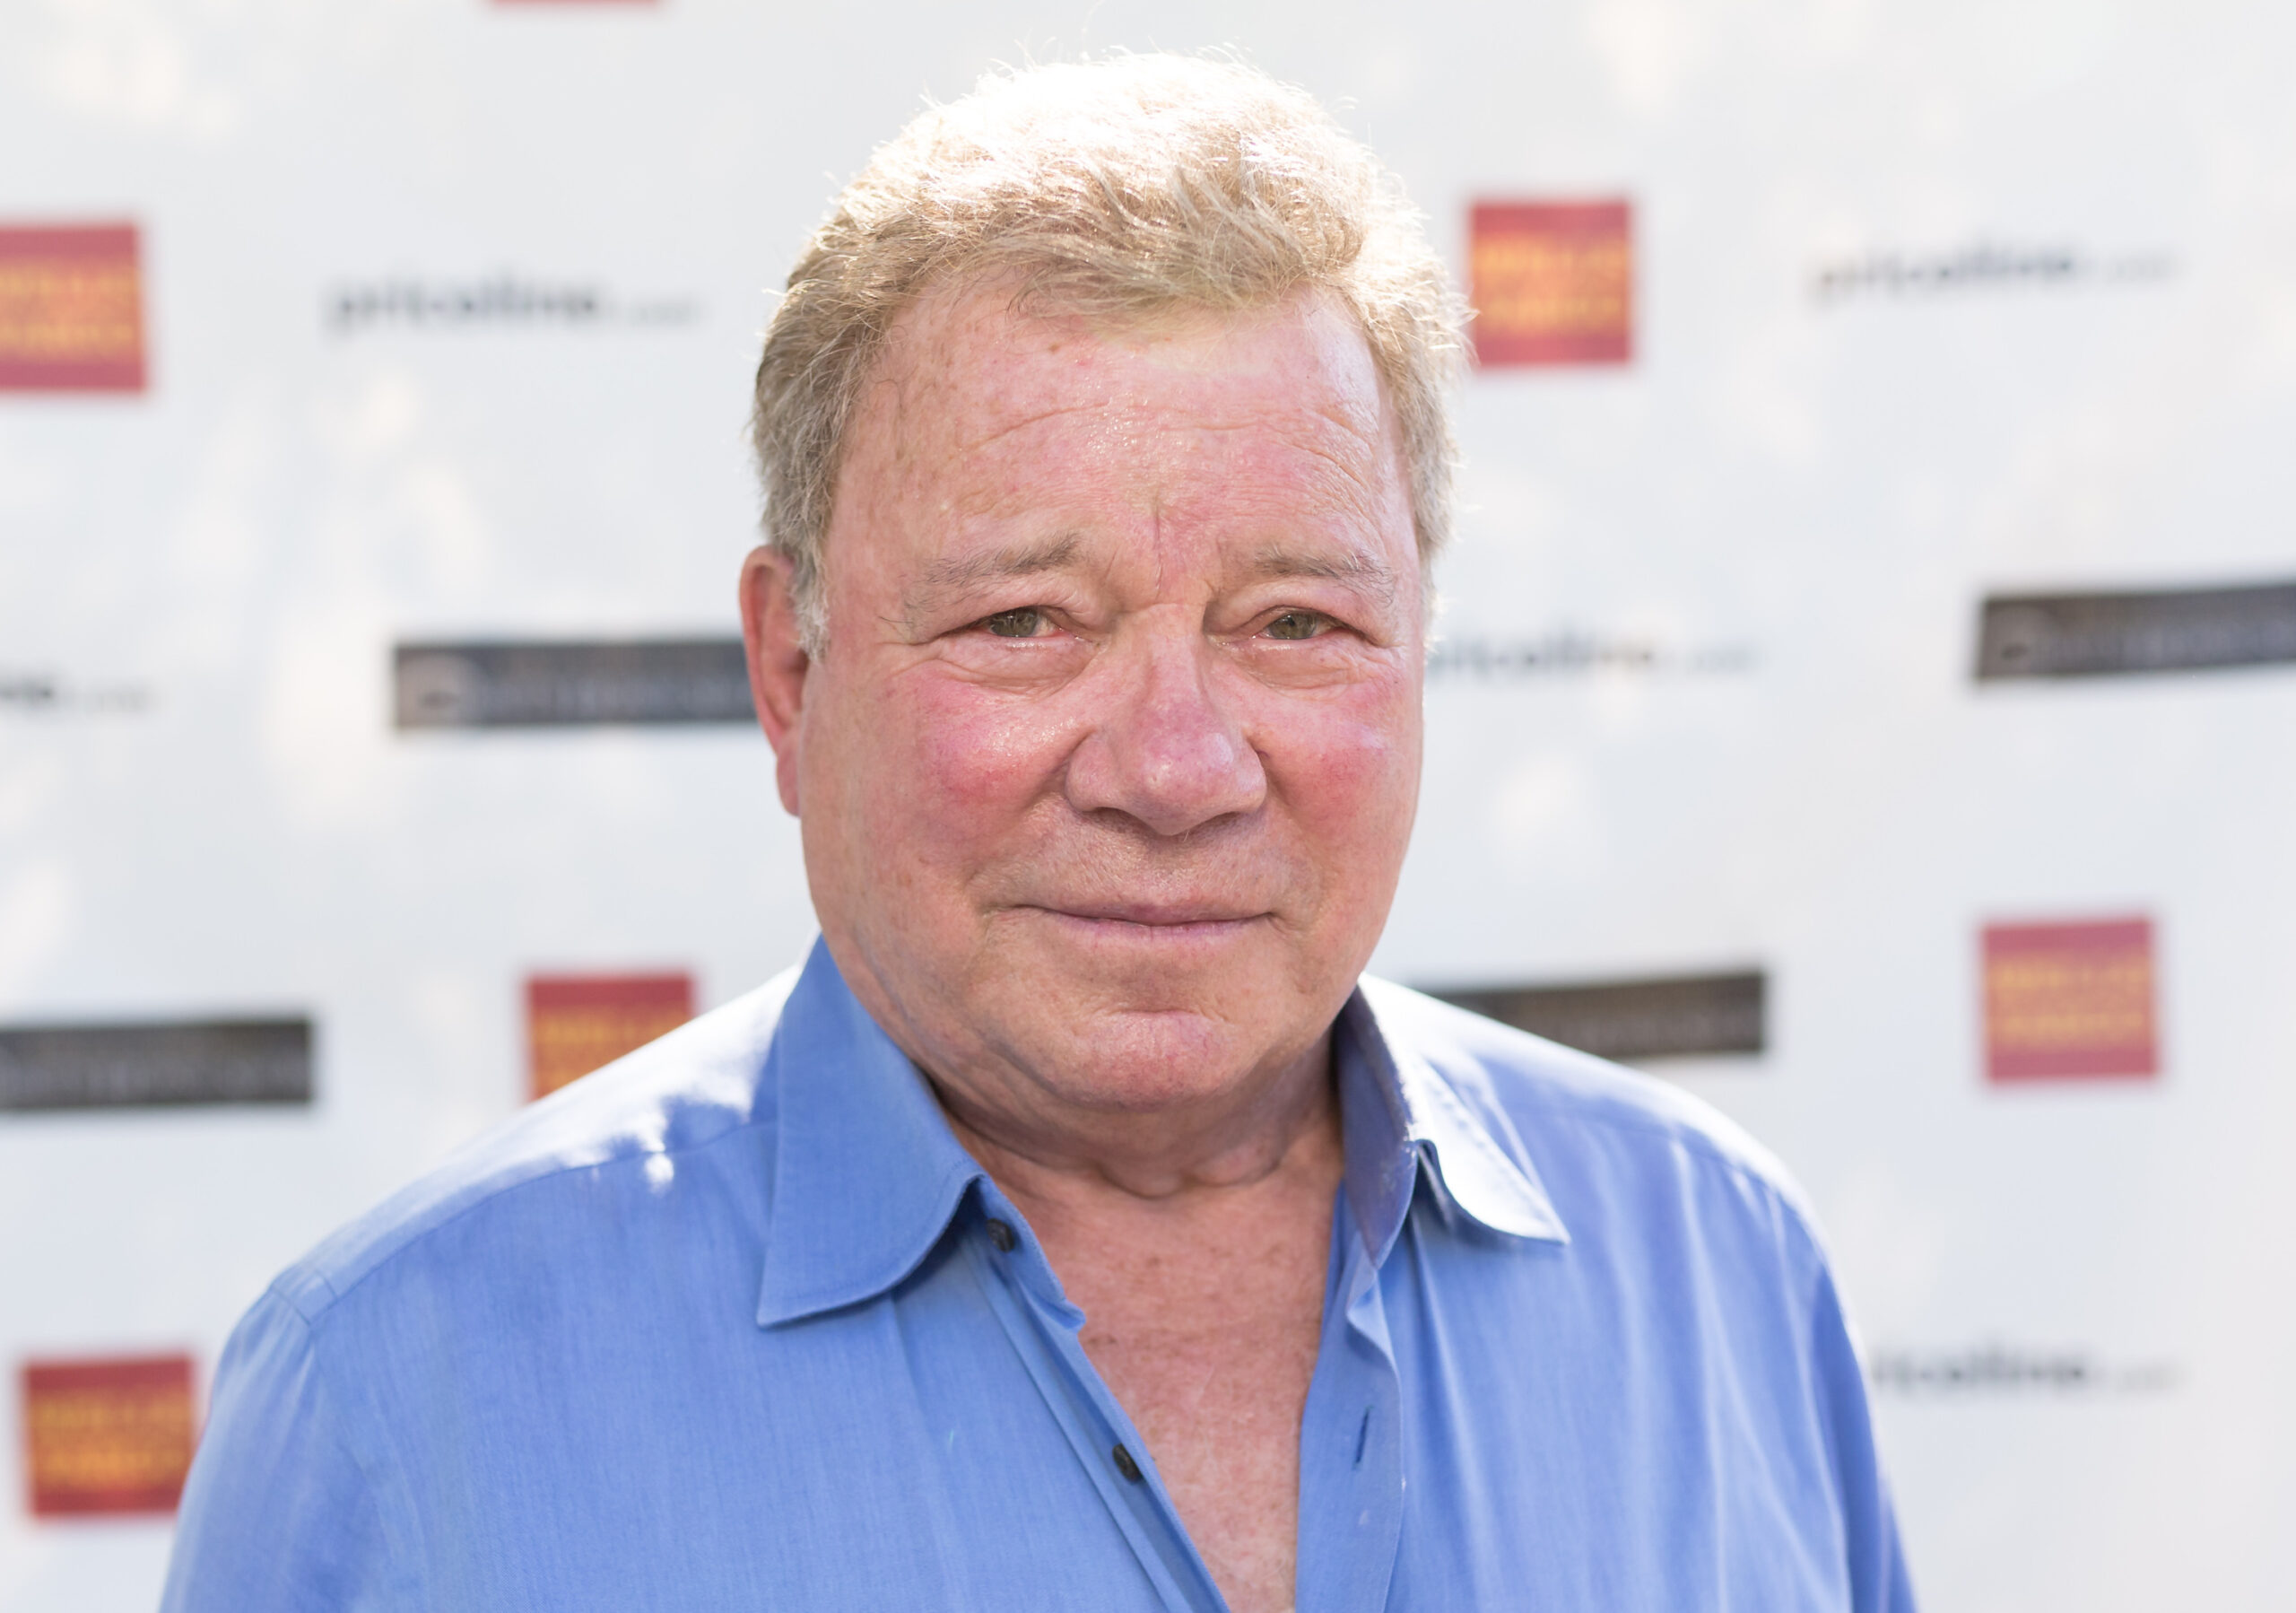 William Shatner On Why He Agreed To Documentary About His Life: ‘I Don’t Have Long To Live’